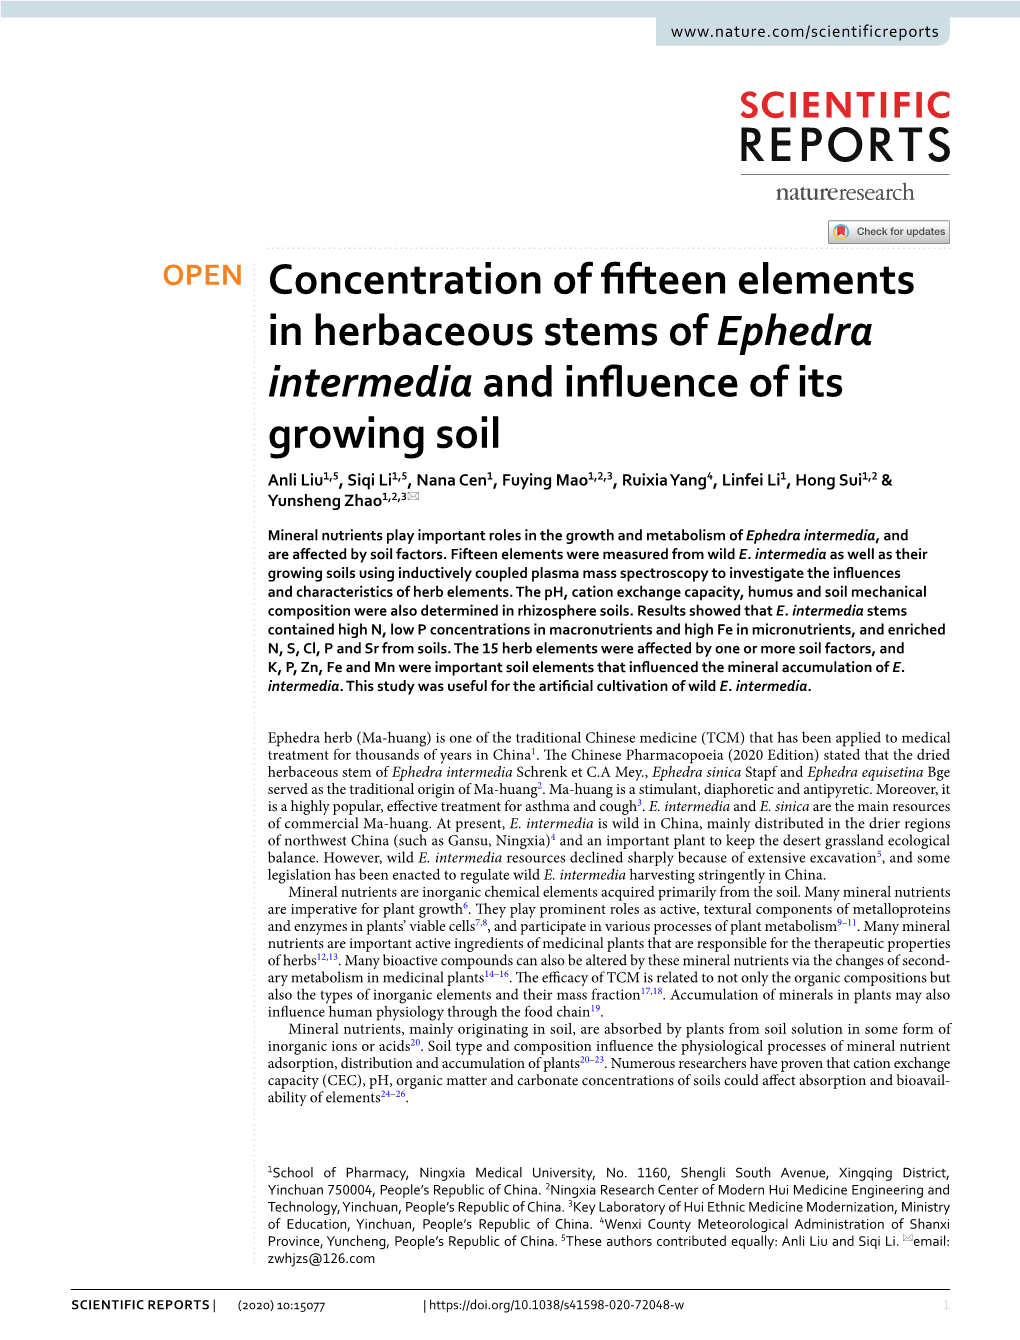 Concentration of Fifteen Elements in Herbaceous Stems of Ephedra